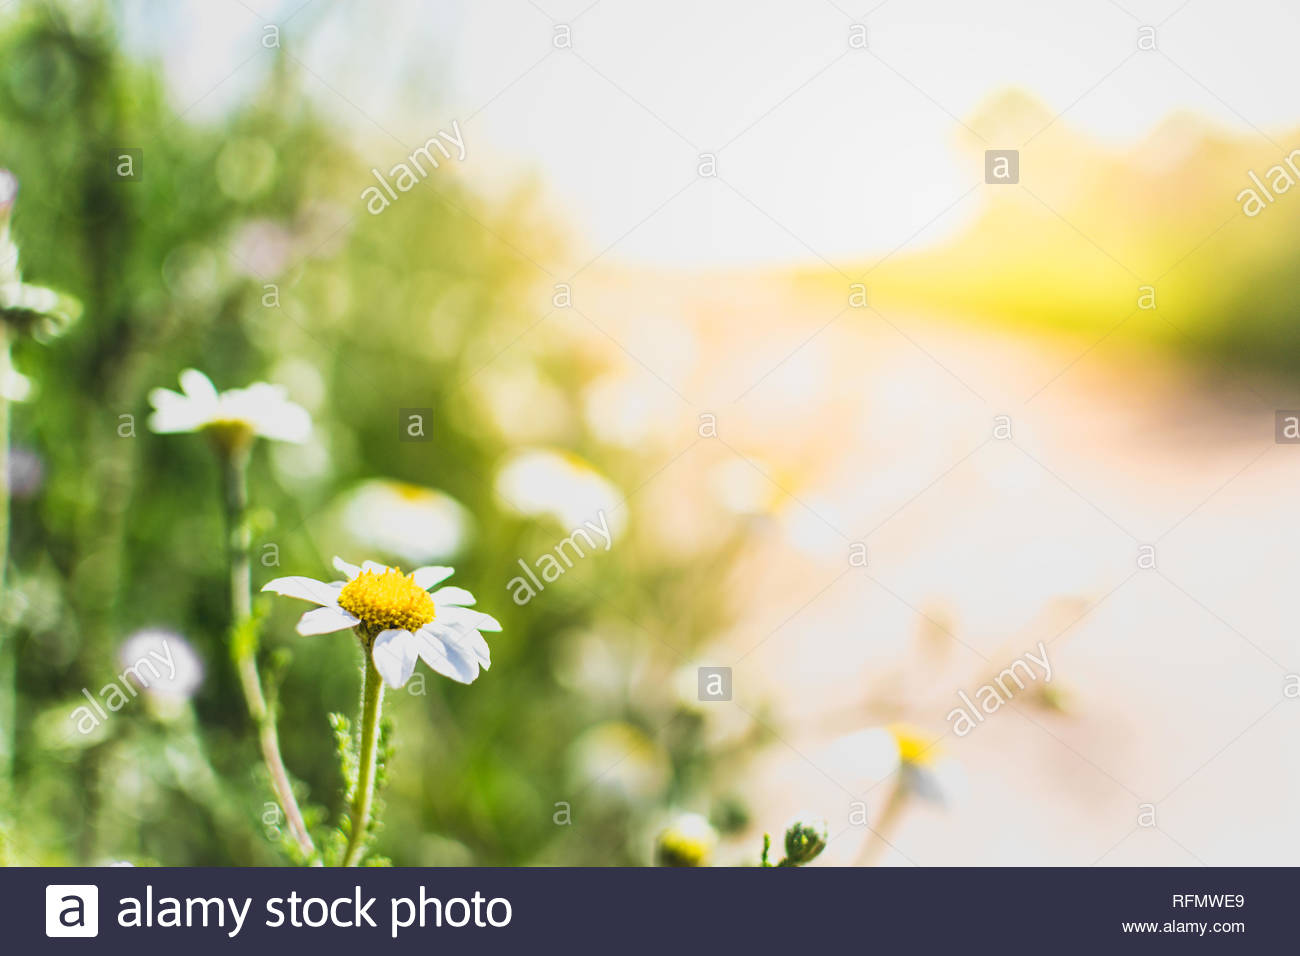 Daisy flowers by a path Springtime background Relaxing